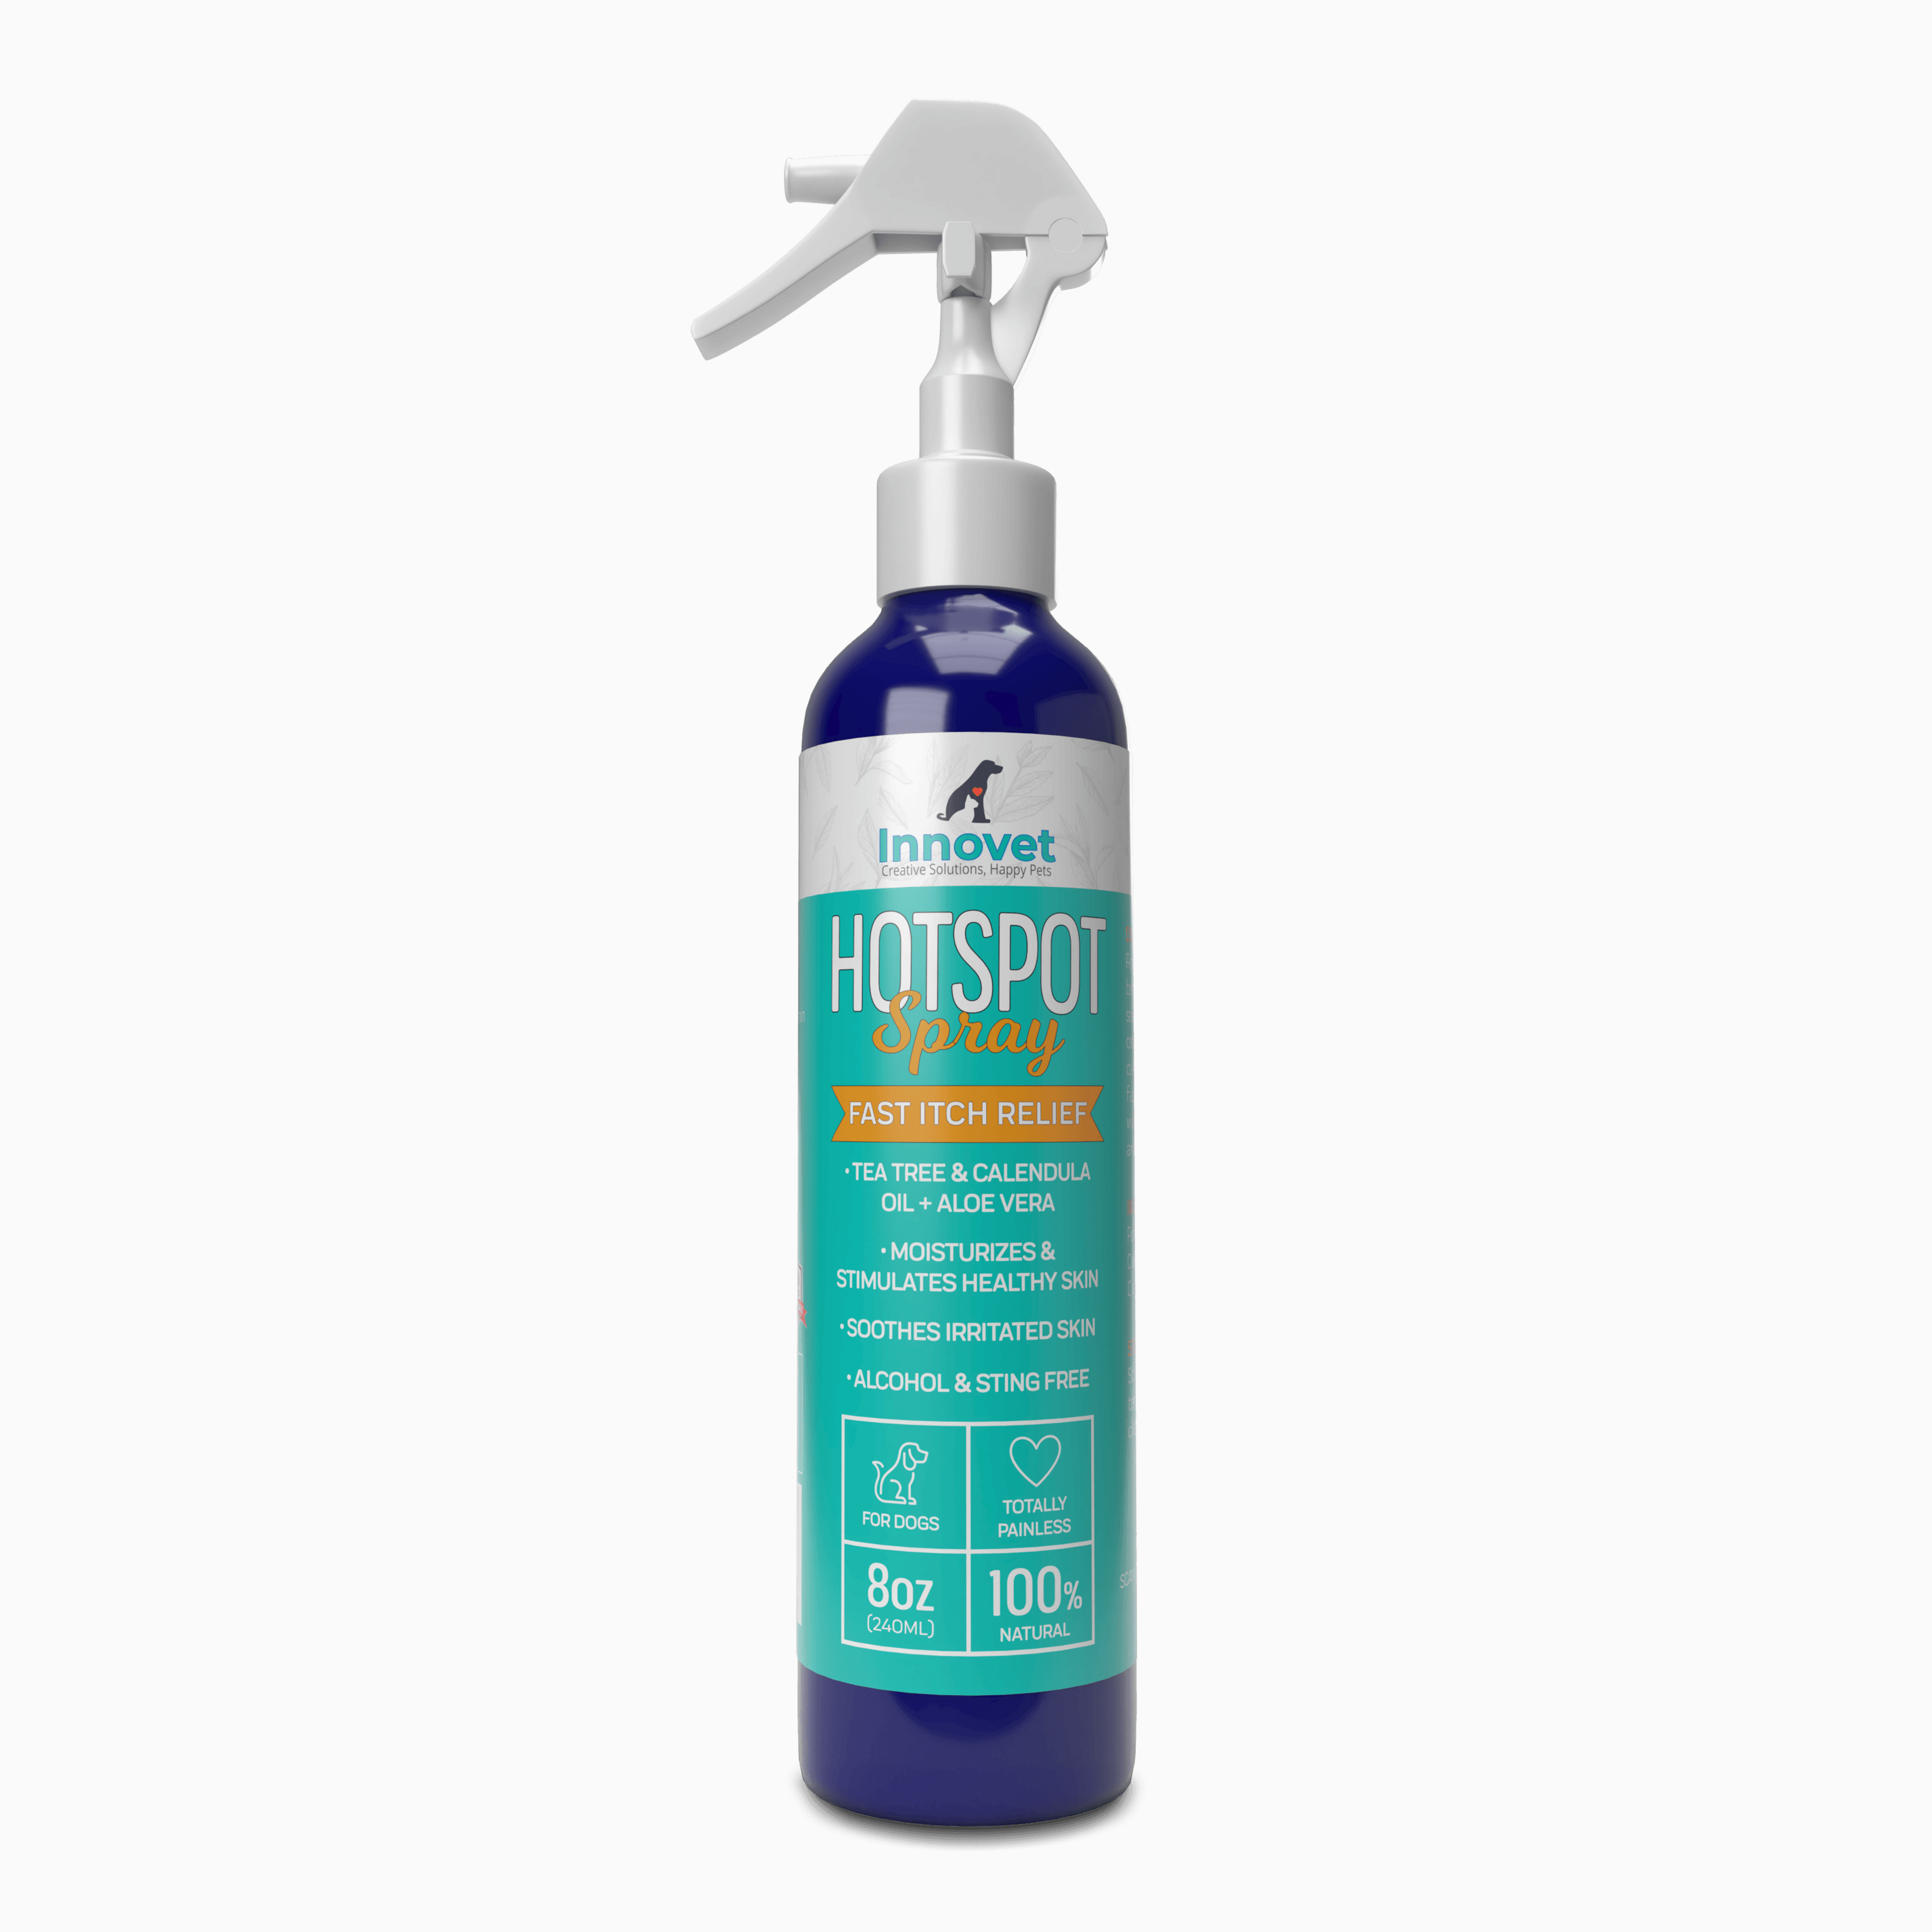 HotSpot Anti Itch Spray for Dogs